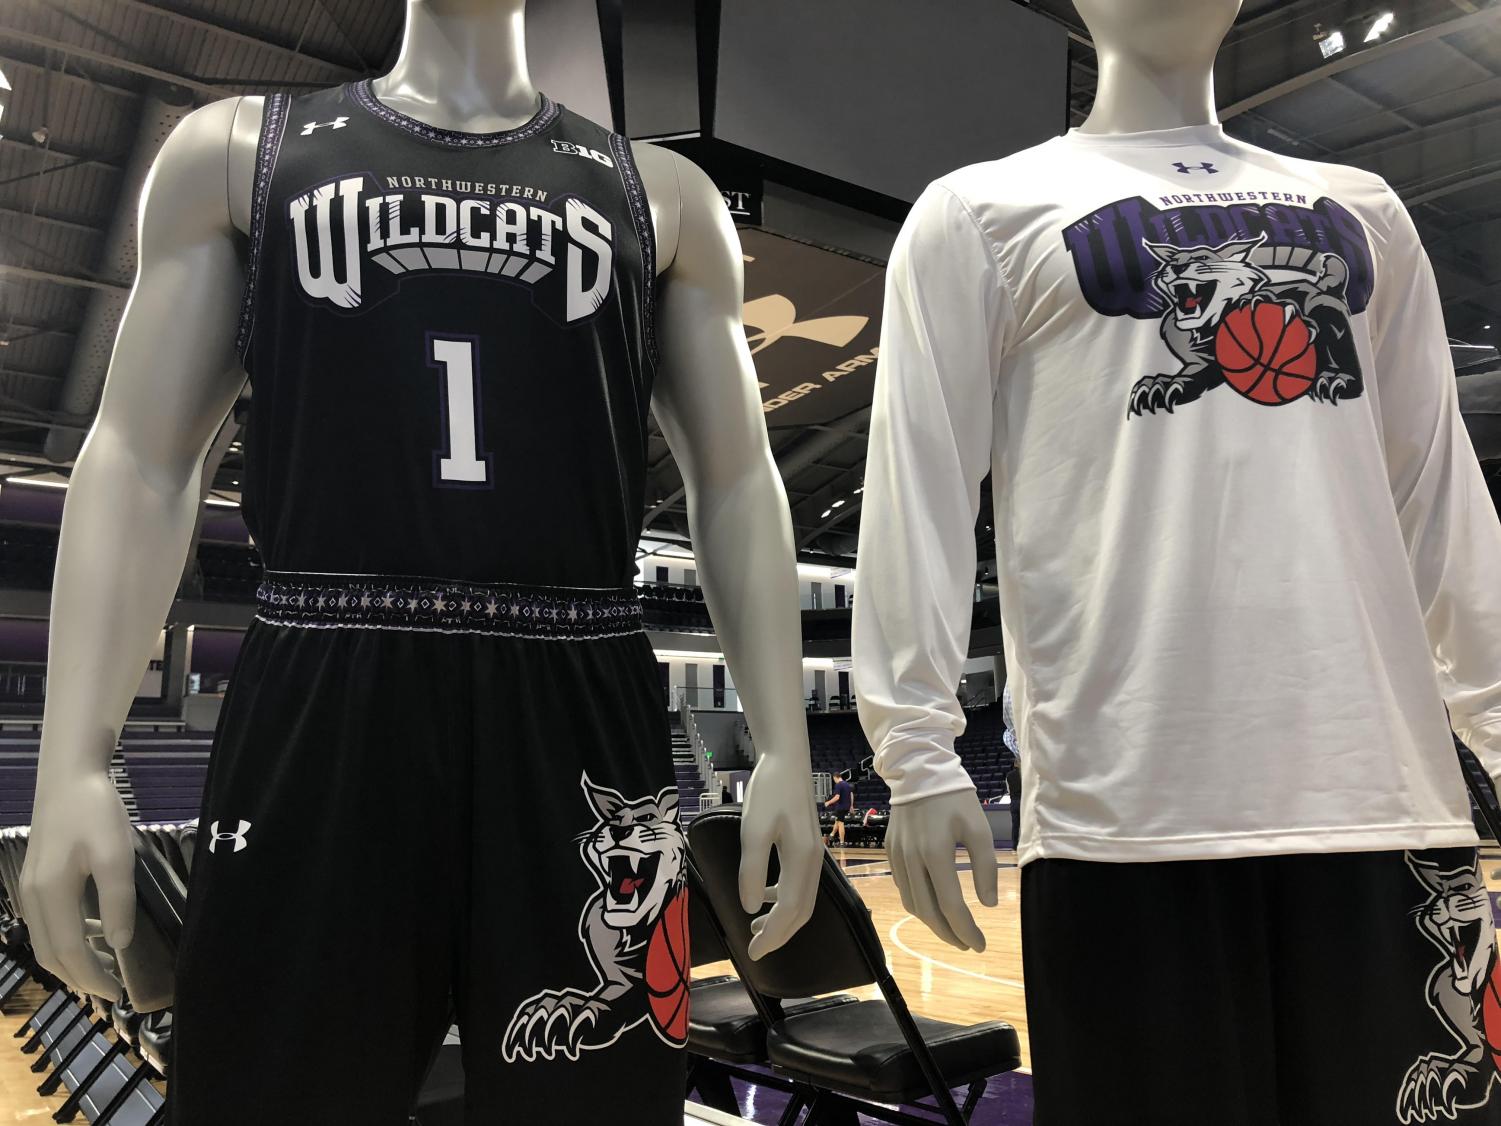 Wildcats to wear throwback jerseys at Wisconsin - Inside NU